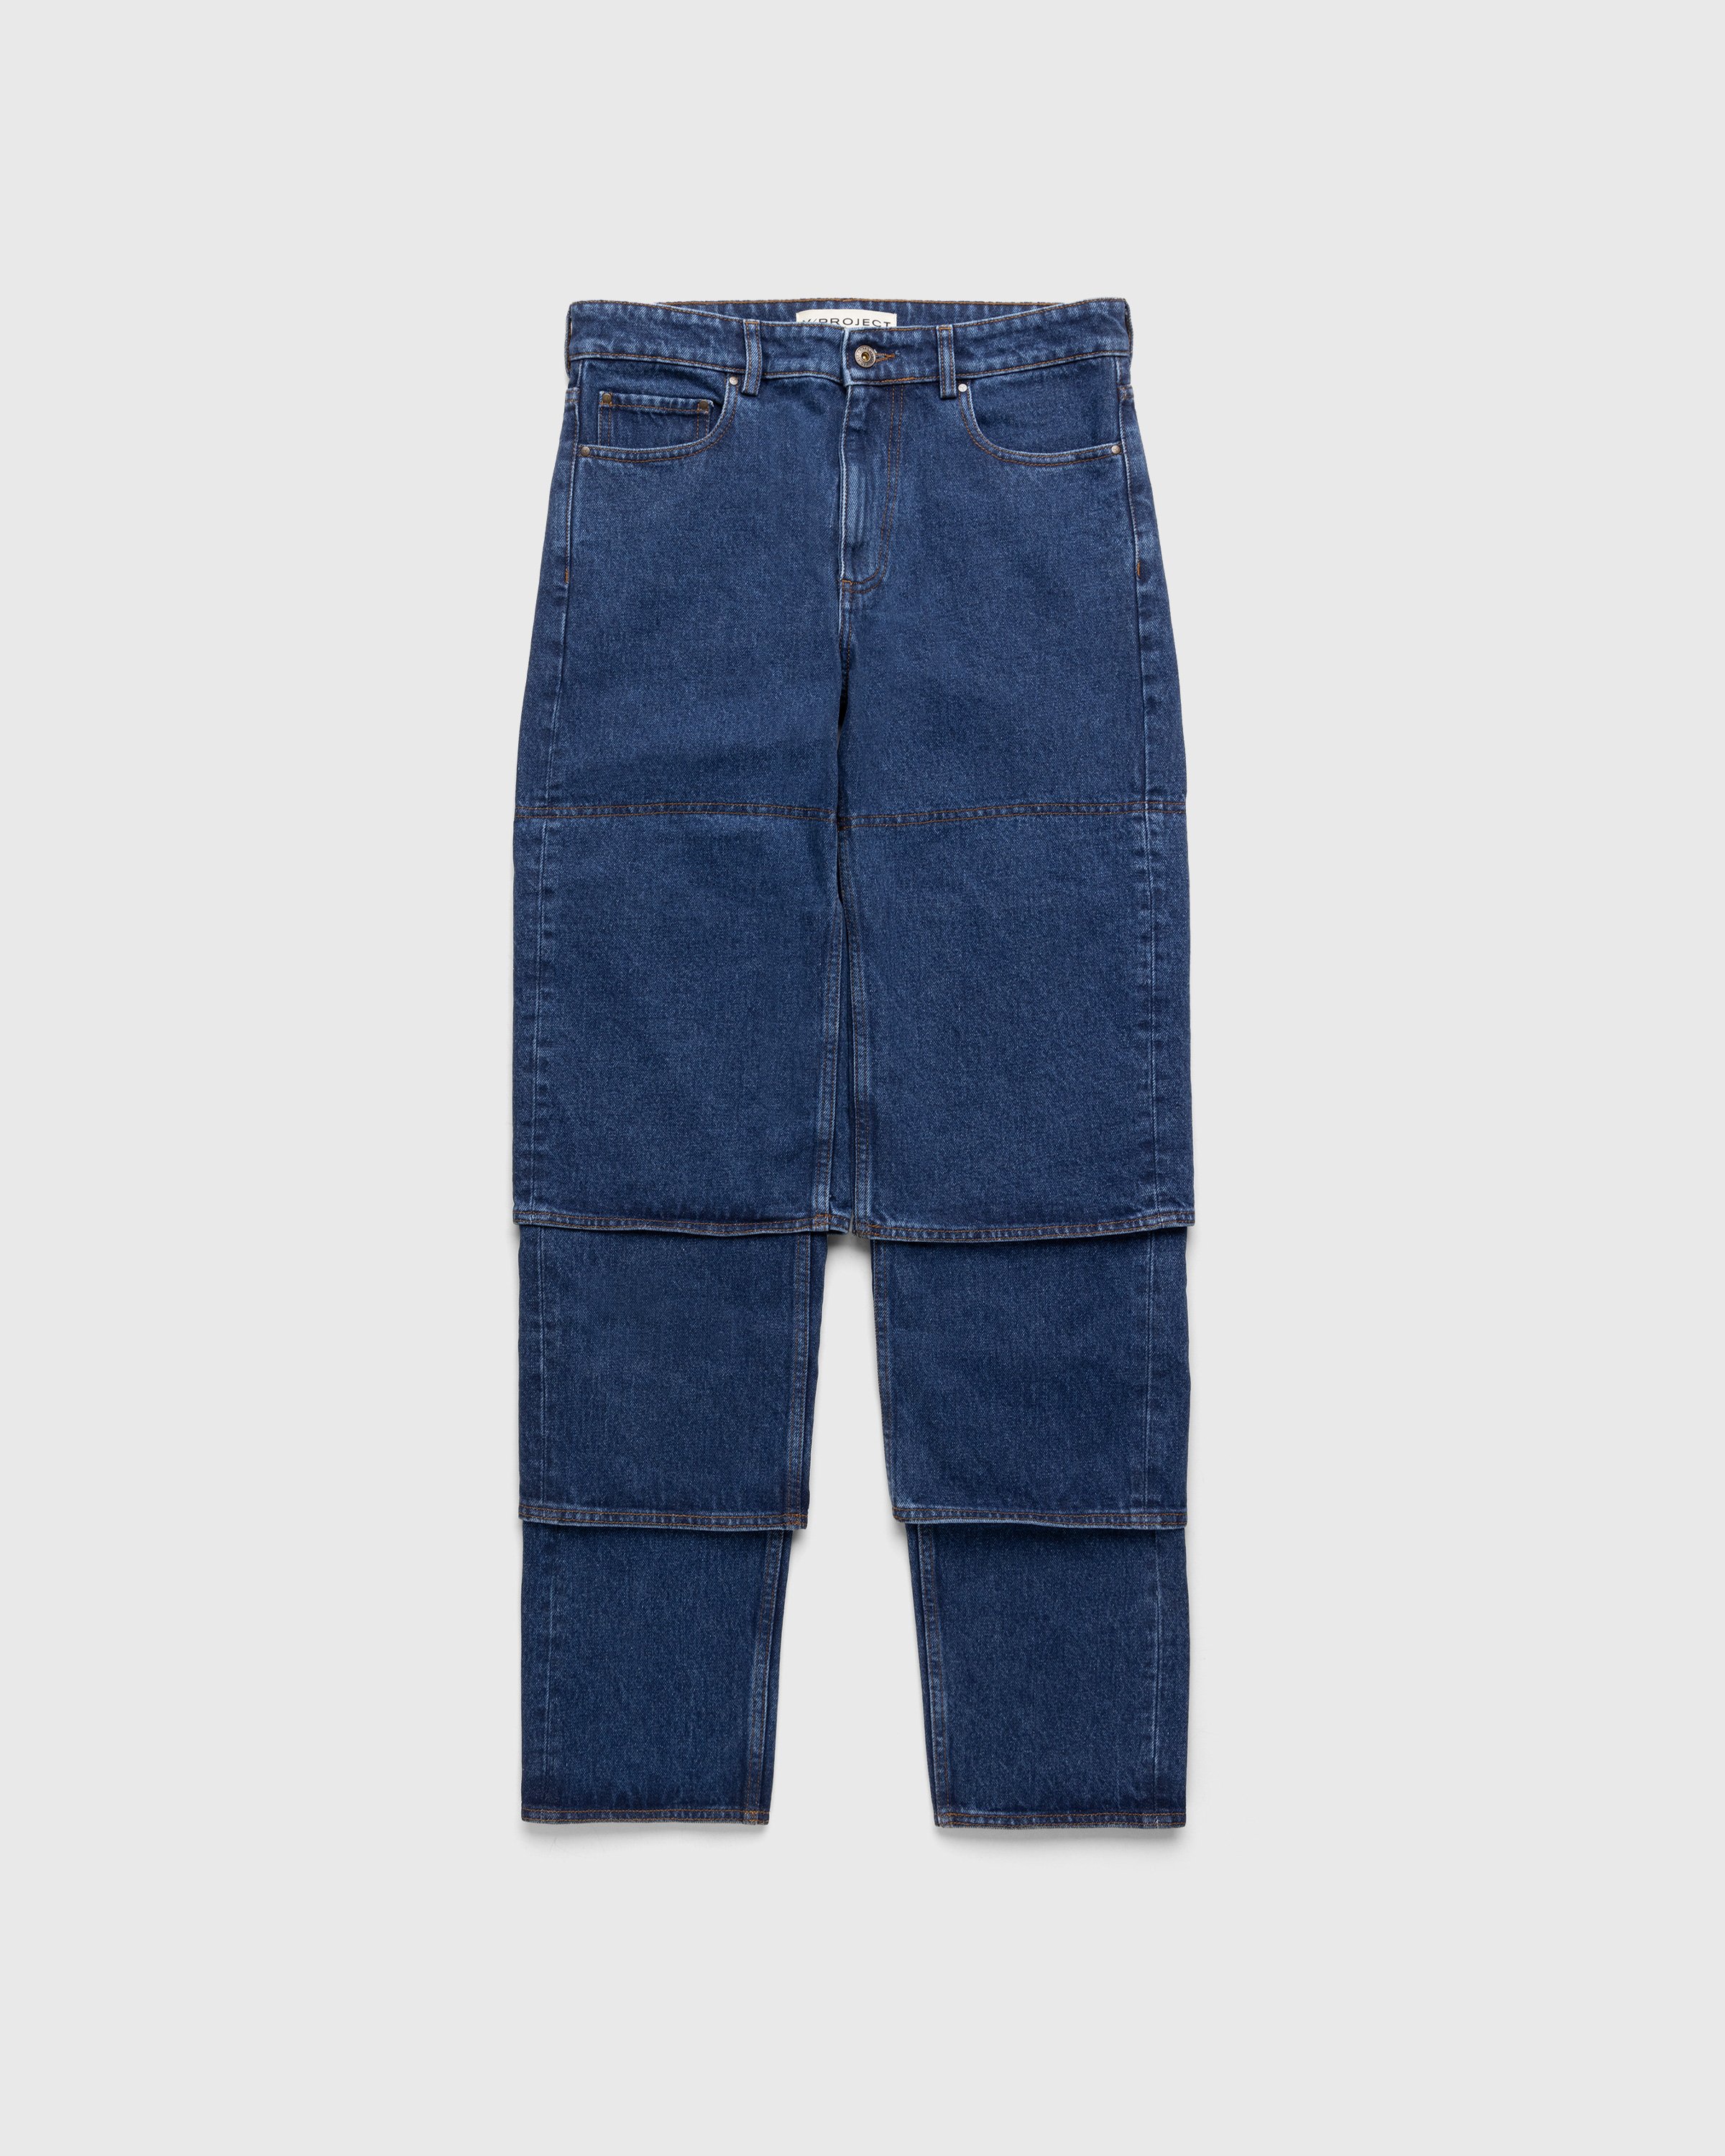 Y/Project - Classic Multi-Cuff Jeans Blue - Clothing - Blue - Image 1